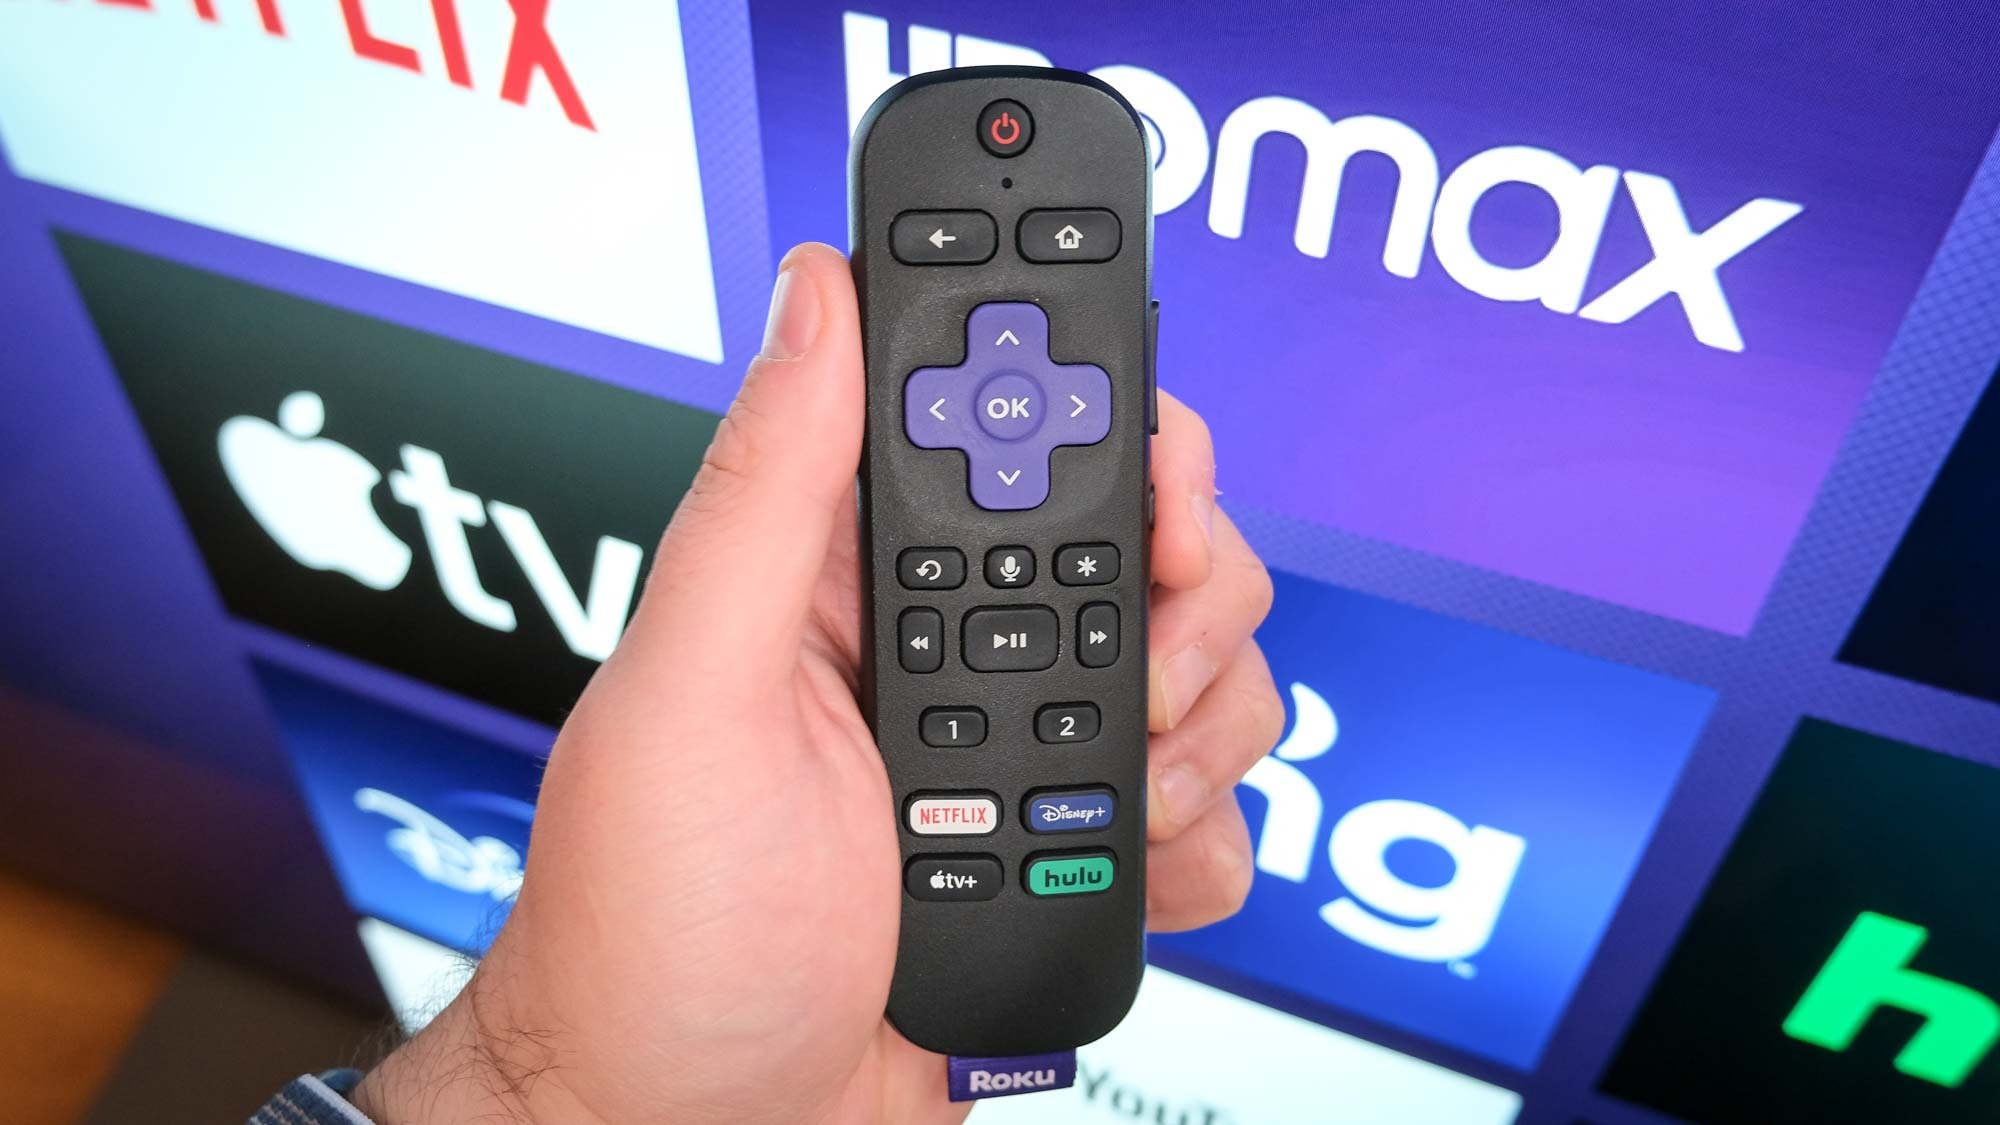 A Roku remote in hand in front of a TV with the Roku homepage.